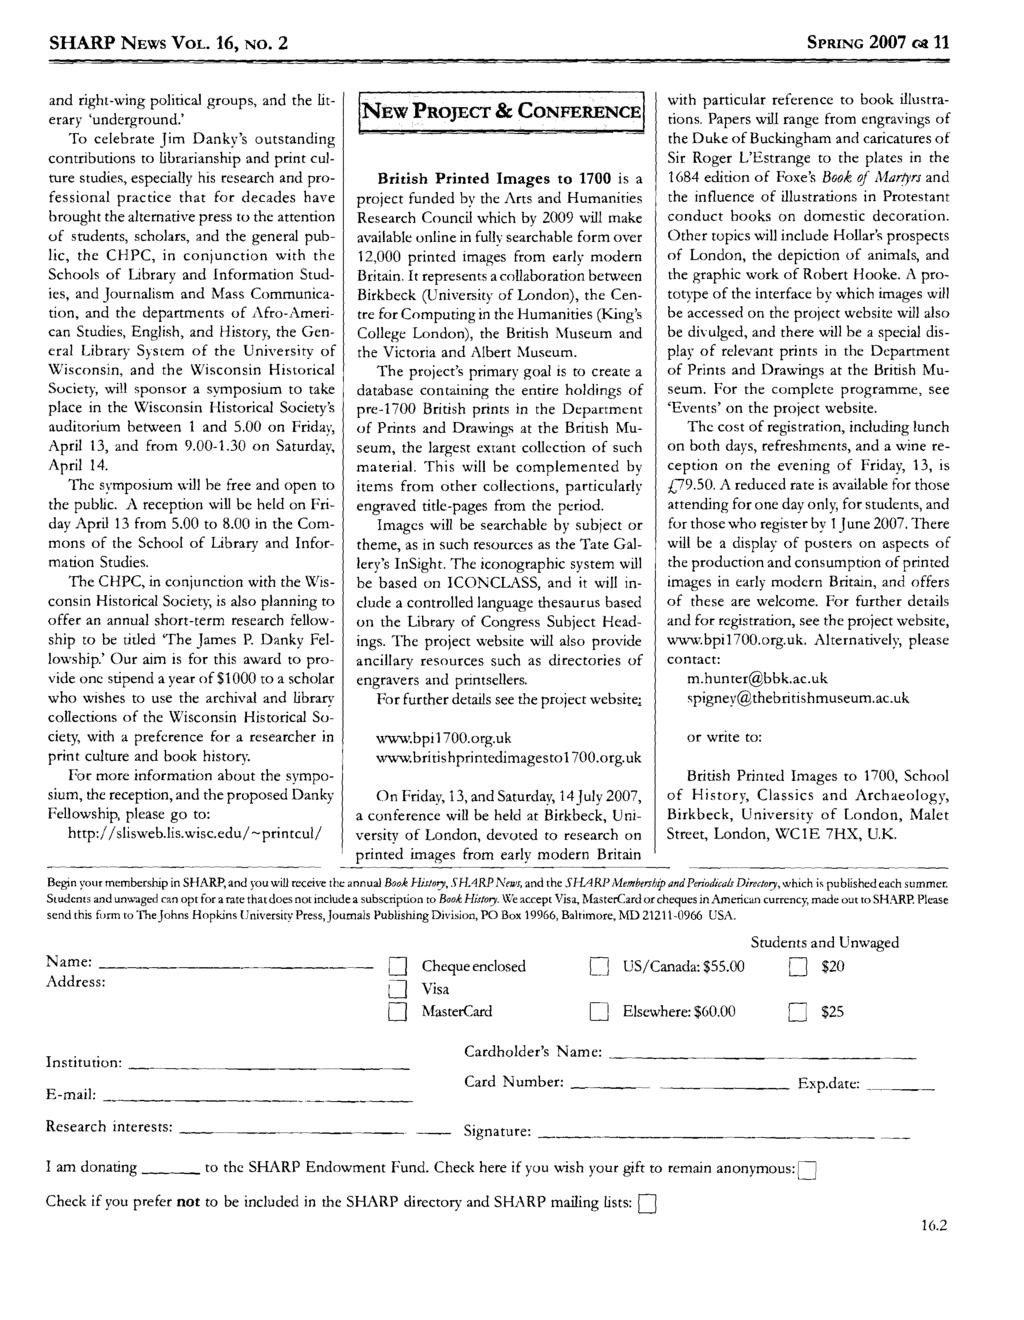 ' SHARP NEWS VOL. 16, NO. 2 SPRING 2007 ca 11 et al.: Volume 16, Number 2 -- - - - and right-wing political groups, and the literary 'underground.